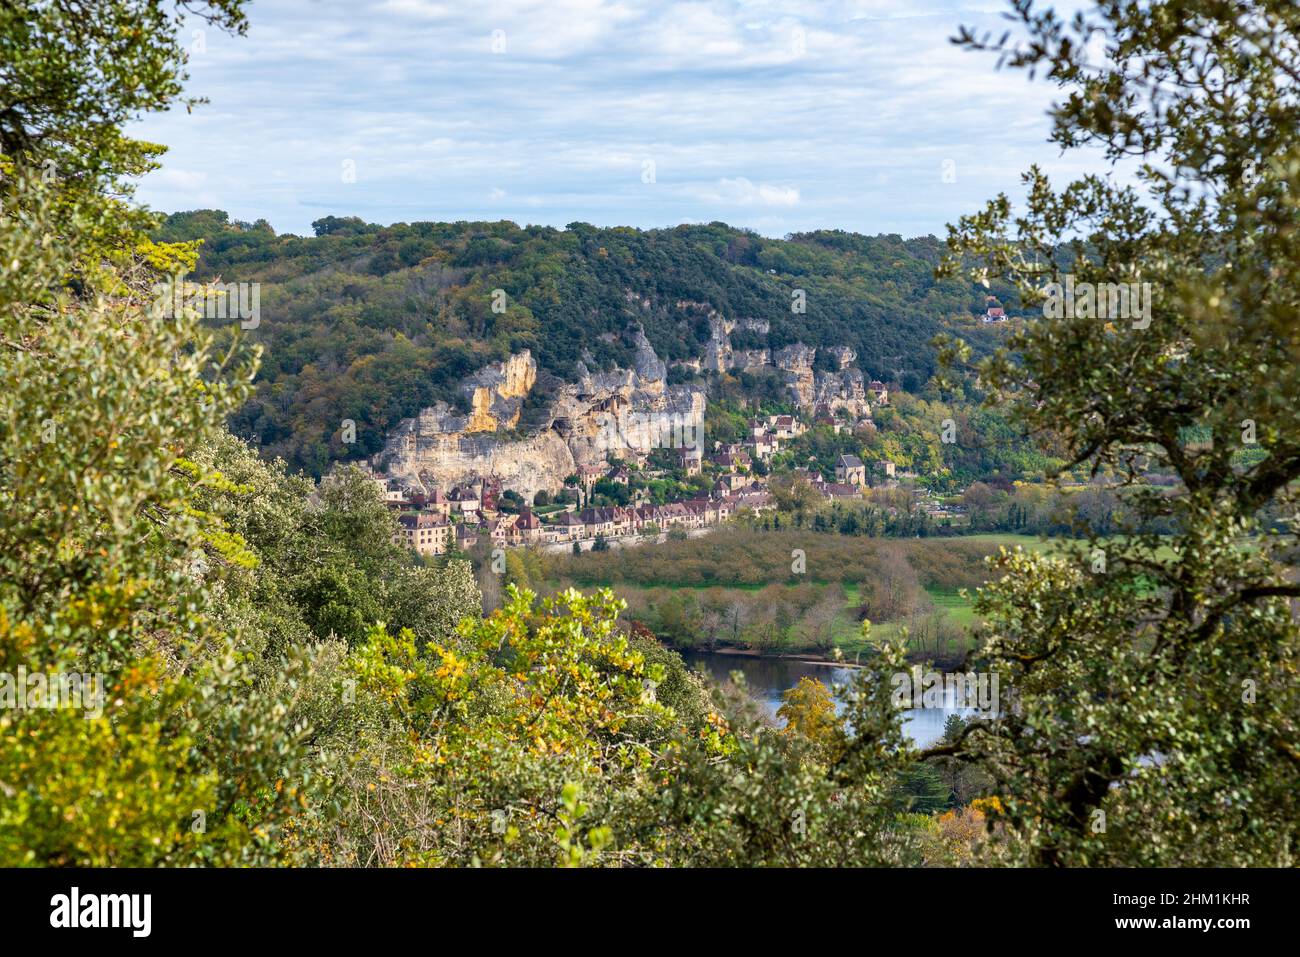 View toward the medieval village of La Roque-Gageac, Perigord, France taken from the garden of the Marqueyssac Castle on a partly overcast autumn afte Stock Photo